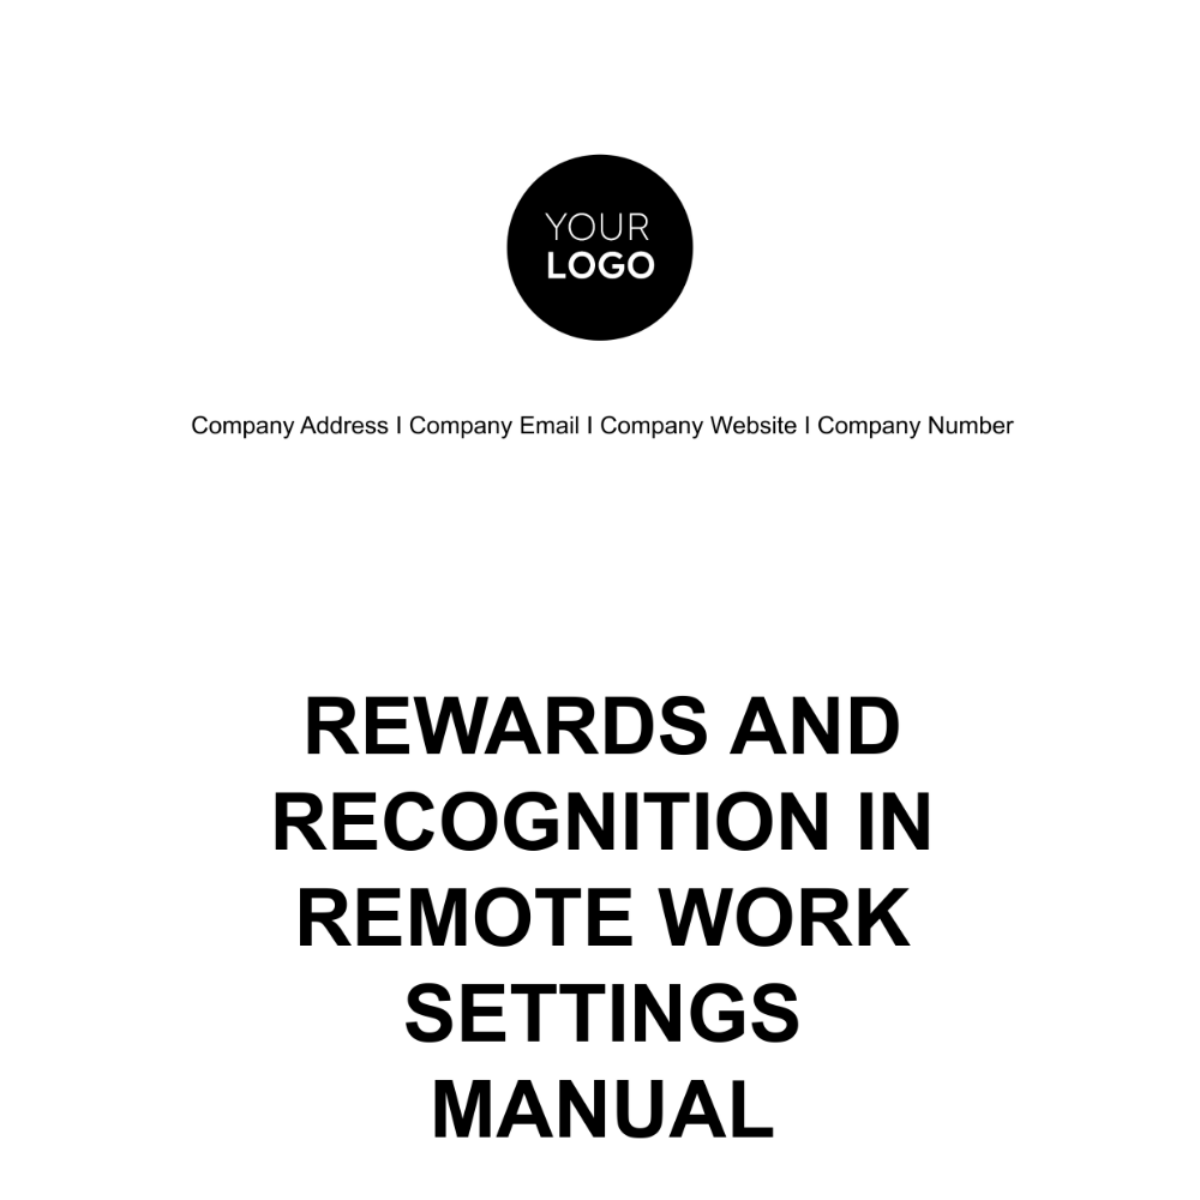 Rewards and Recognition in Remote Work Settings Manual HR Template